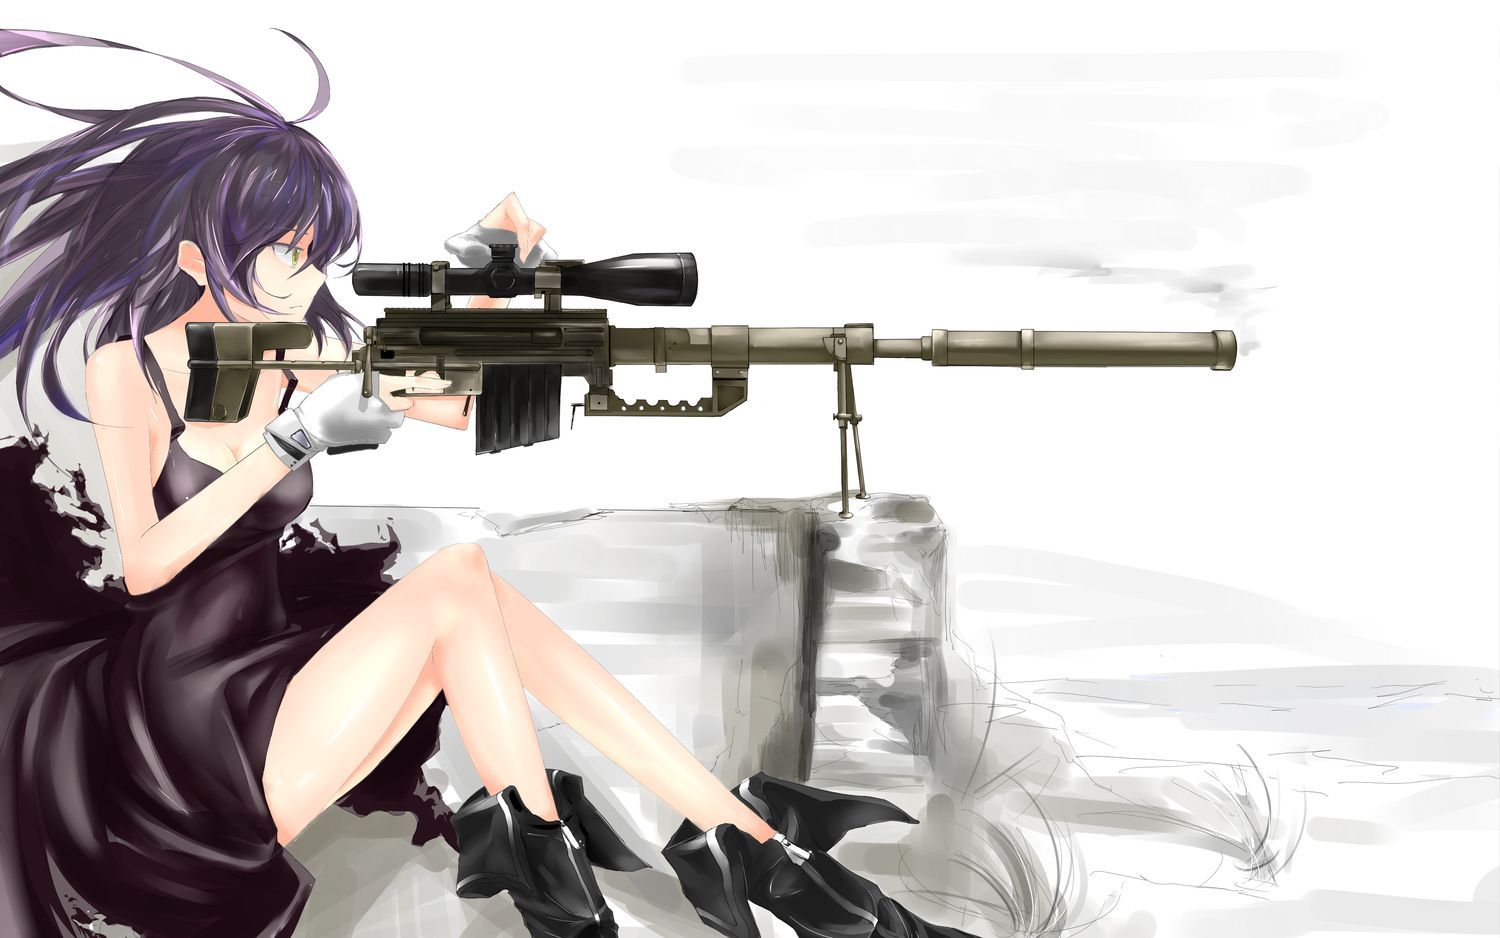 1920x1080 Anime Girl Camouflage Wallpapers - Wallpaper Cave